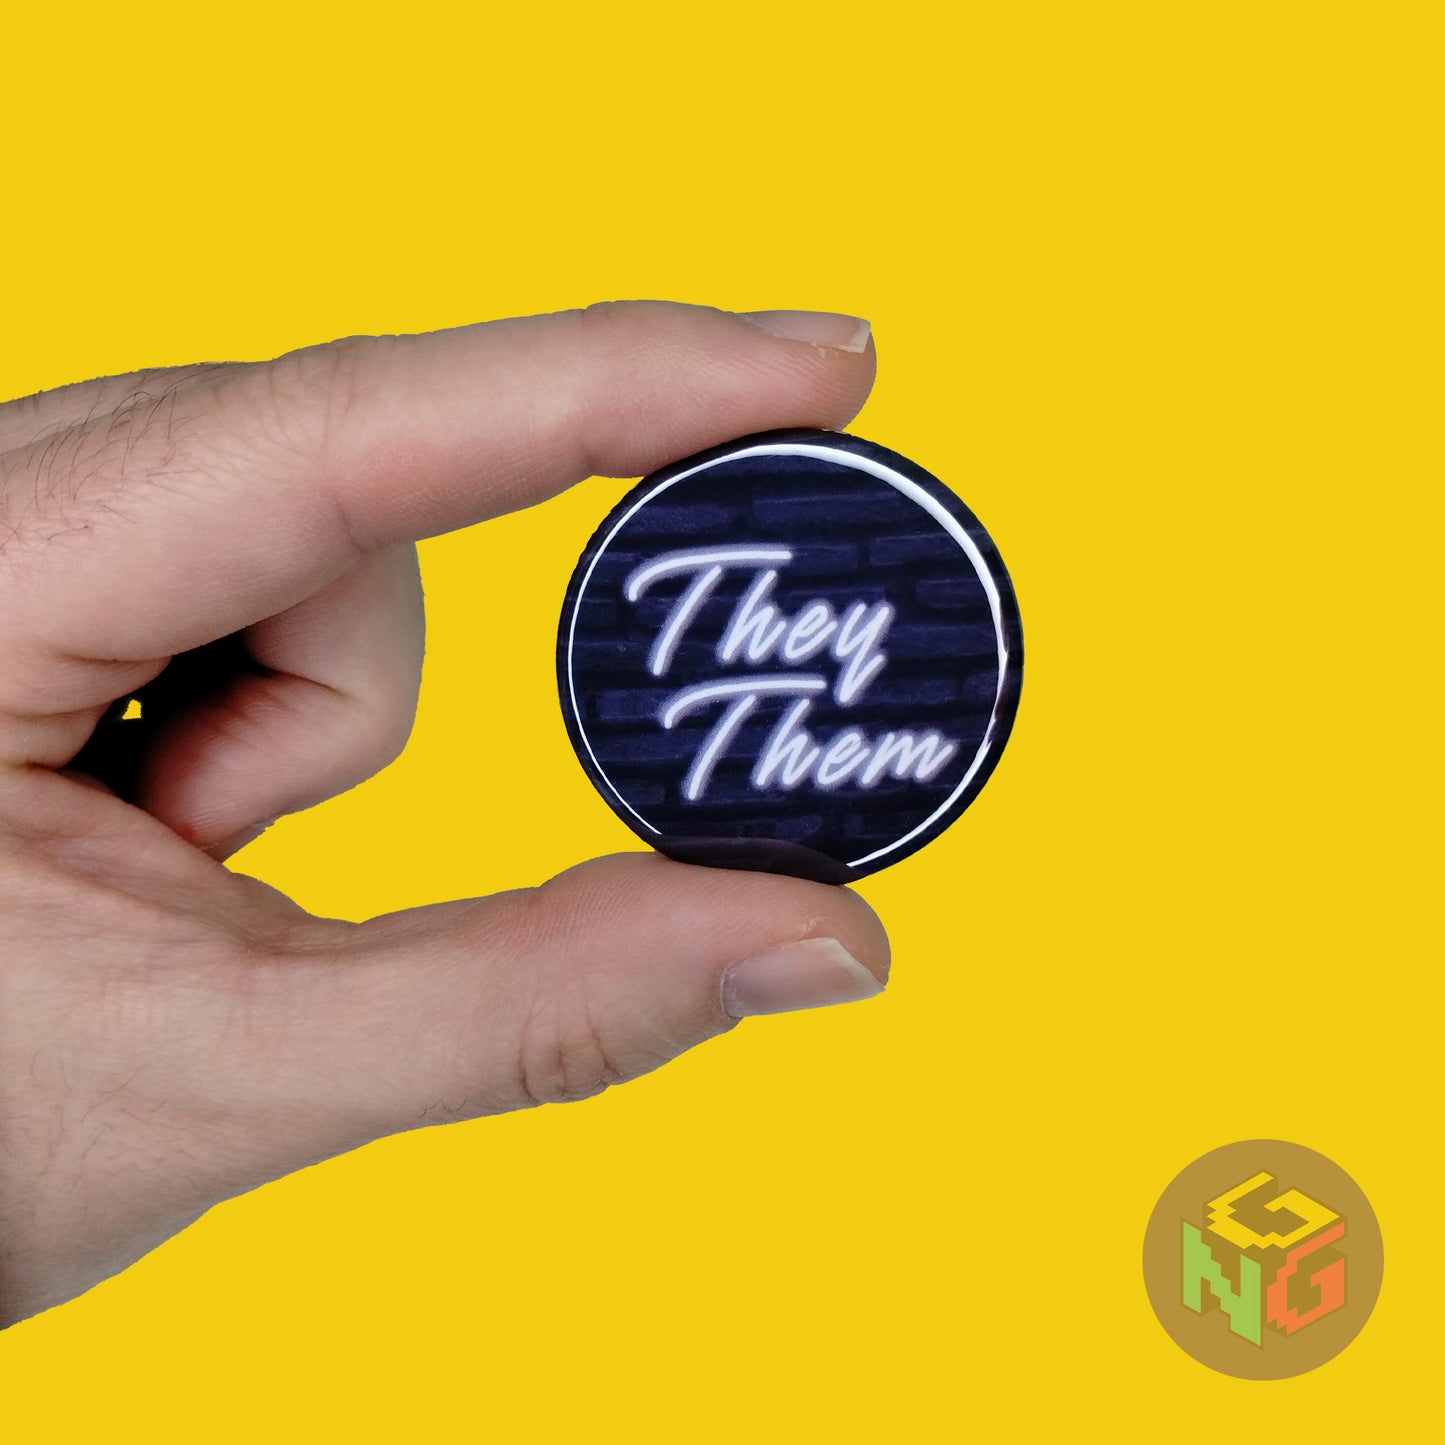 round they them pronoun pin featuring white neon text on a dark blue brick background. The pin is held in a hand in front of a yellow background